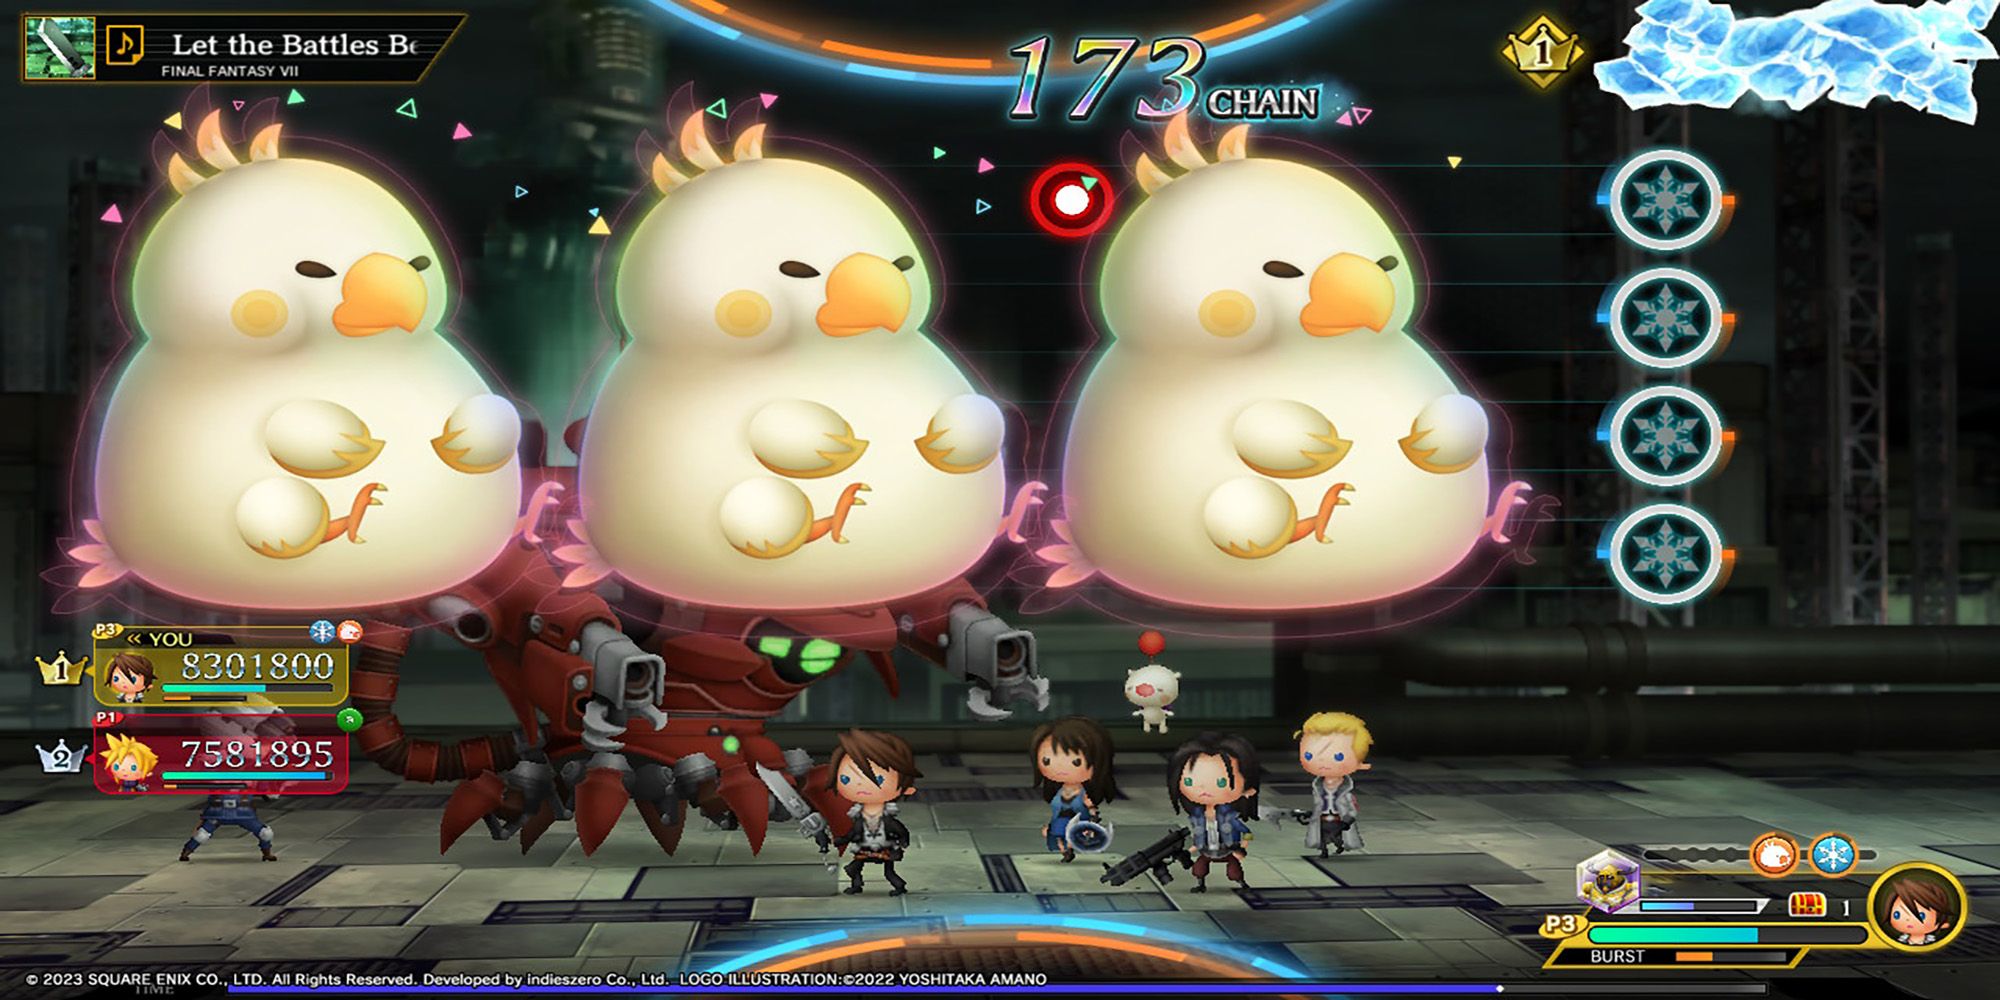 Squall, Rinoa, Laguna, and Seifer get impeded by a Fat Chocobo burst during a Multi Battle in Theatrhythm: Final Bar Line.